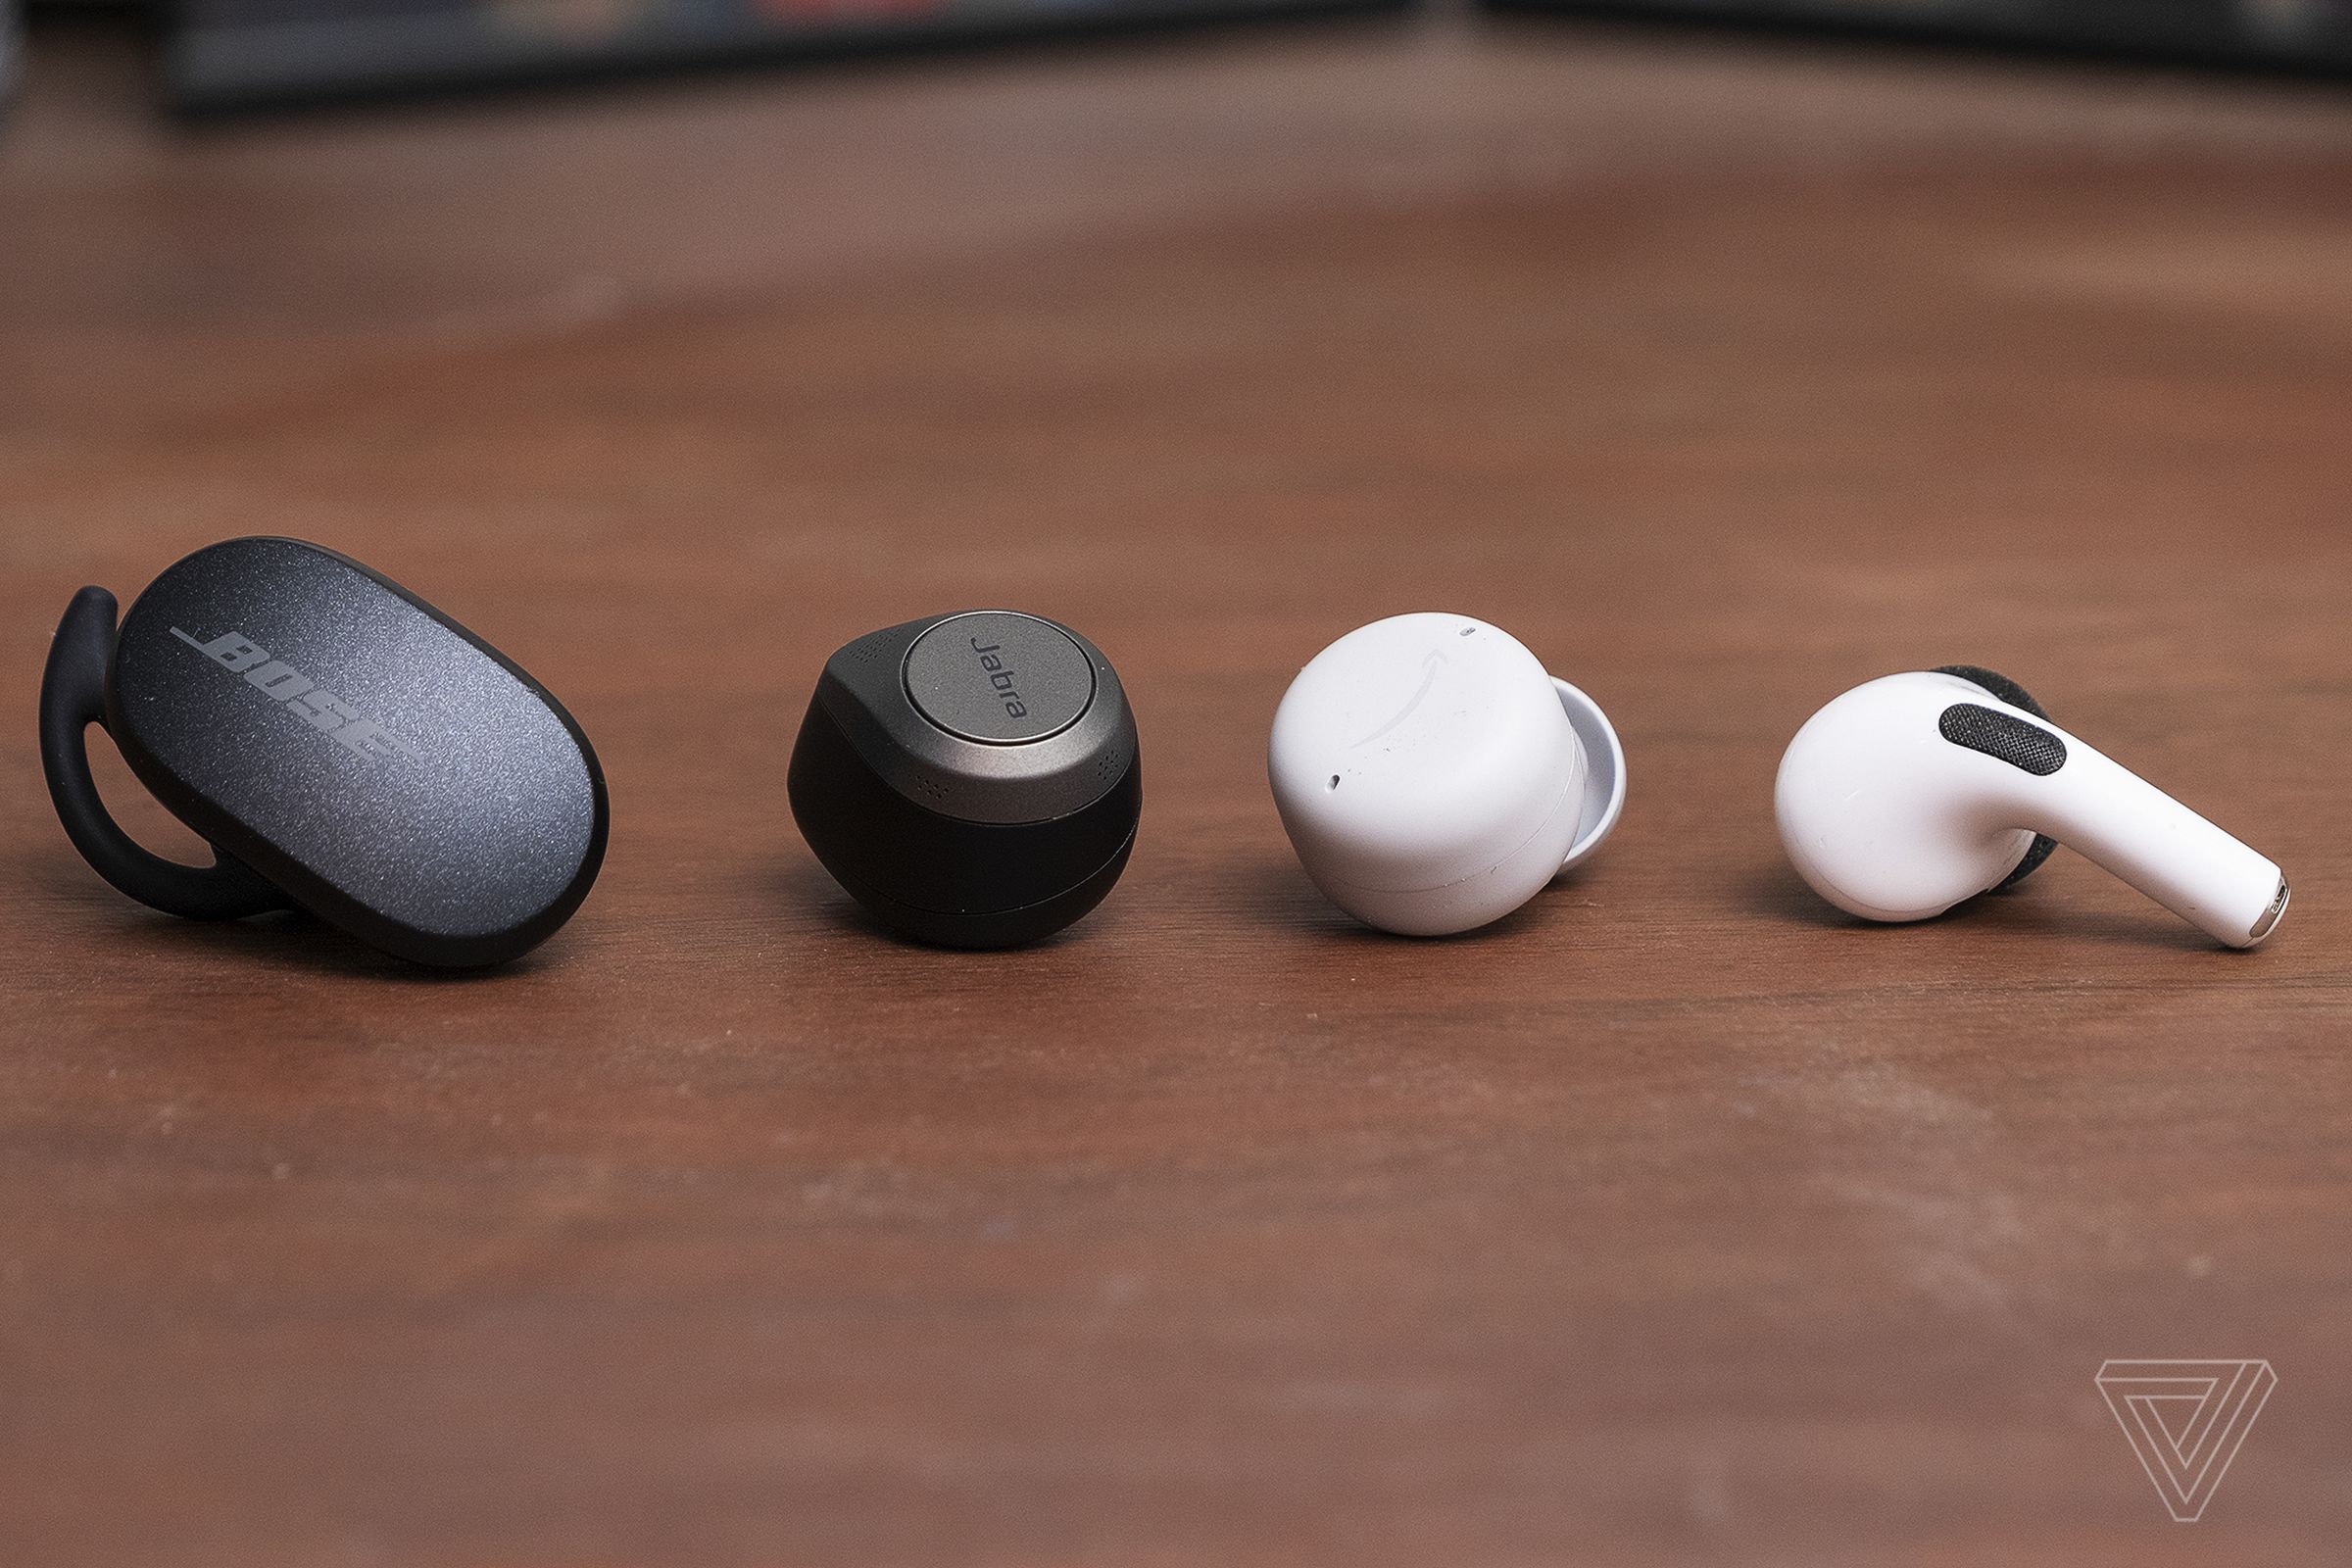 The new Echo Buds are 20 percent smaller than Amazon’s first-gen earbuds.